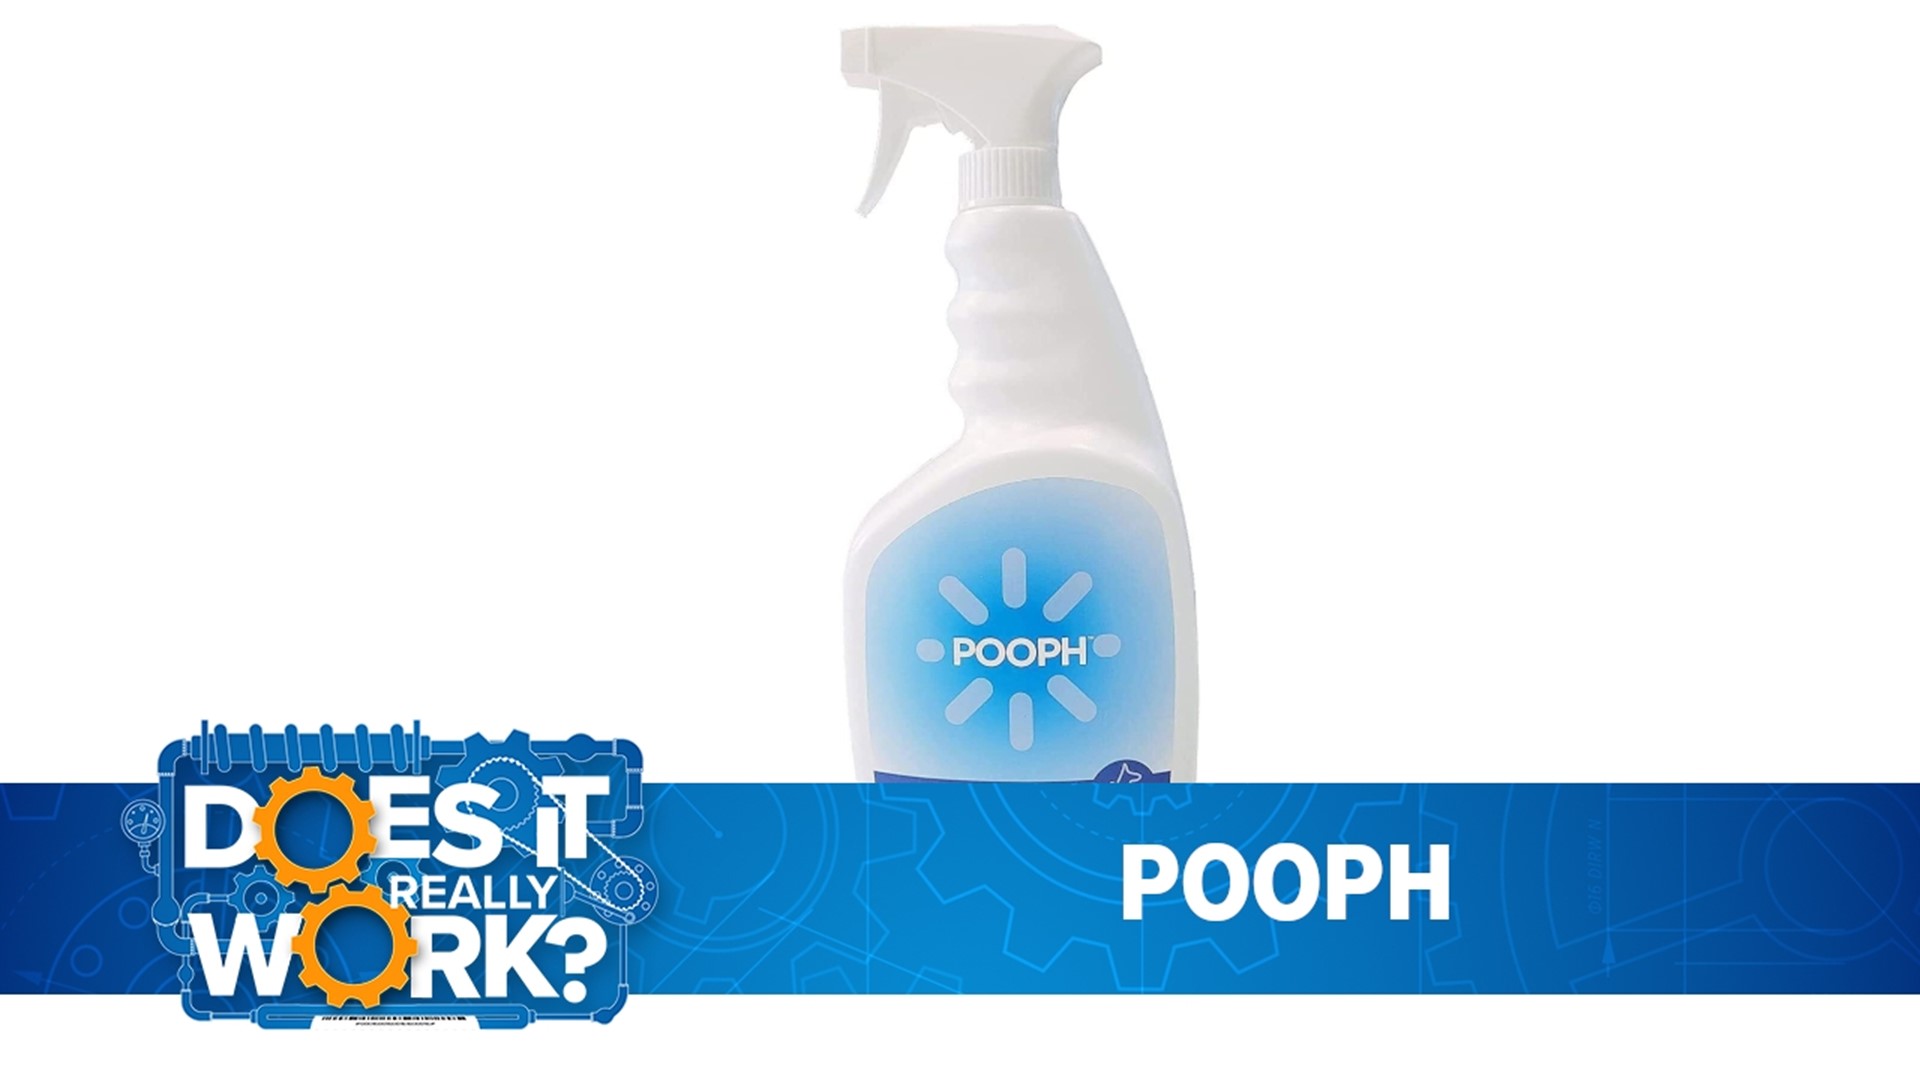 The maker claims just one or two sprays and the odors are gone.